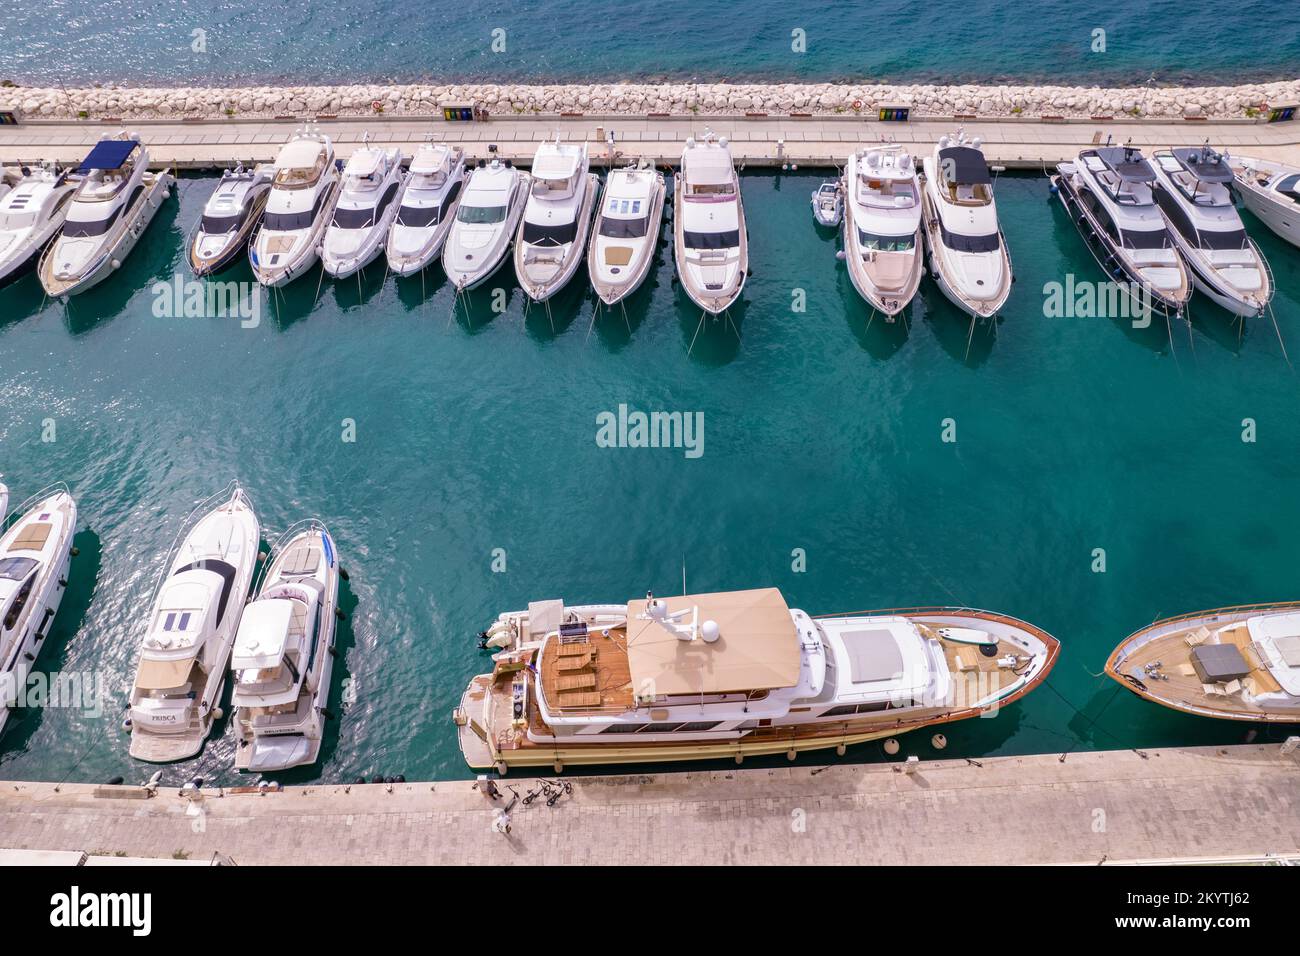 The aerial view on croatian beach and yachts pier in Adriatic sea. Marina Lav hotel and embankment near it. Boats and yachts staying in the bay. Stock Photo